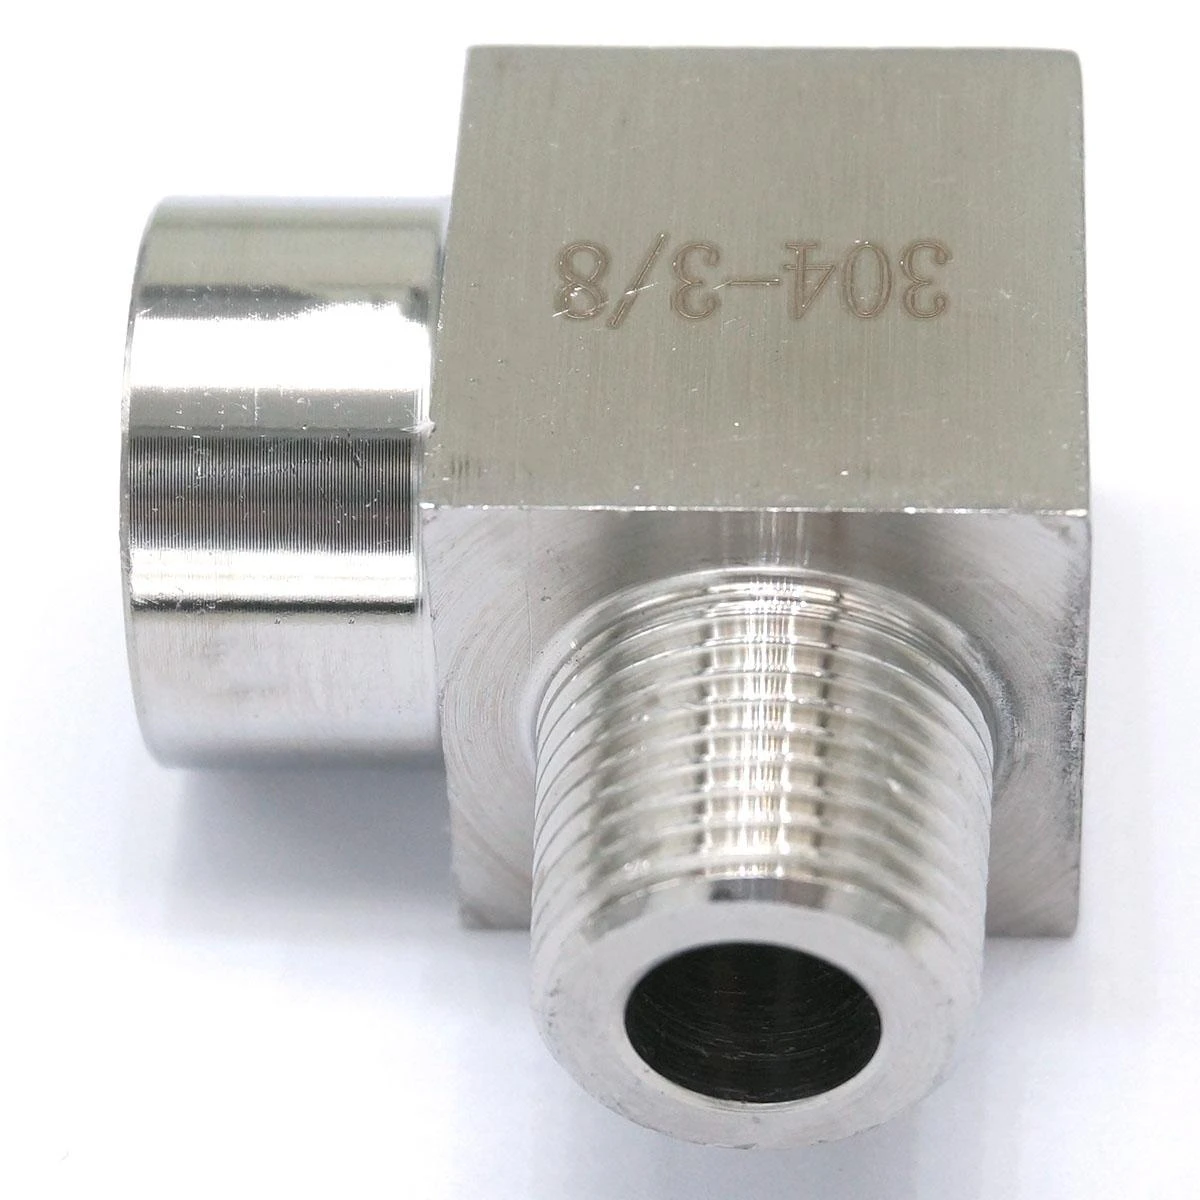 304 Stainless Steel BSP Female Thread 90°Elbow Reducer Connector Fitting Adapter 